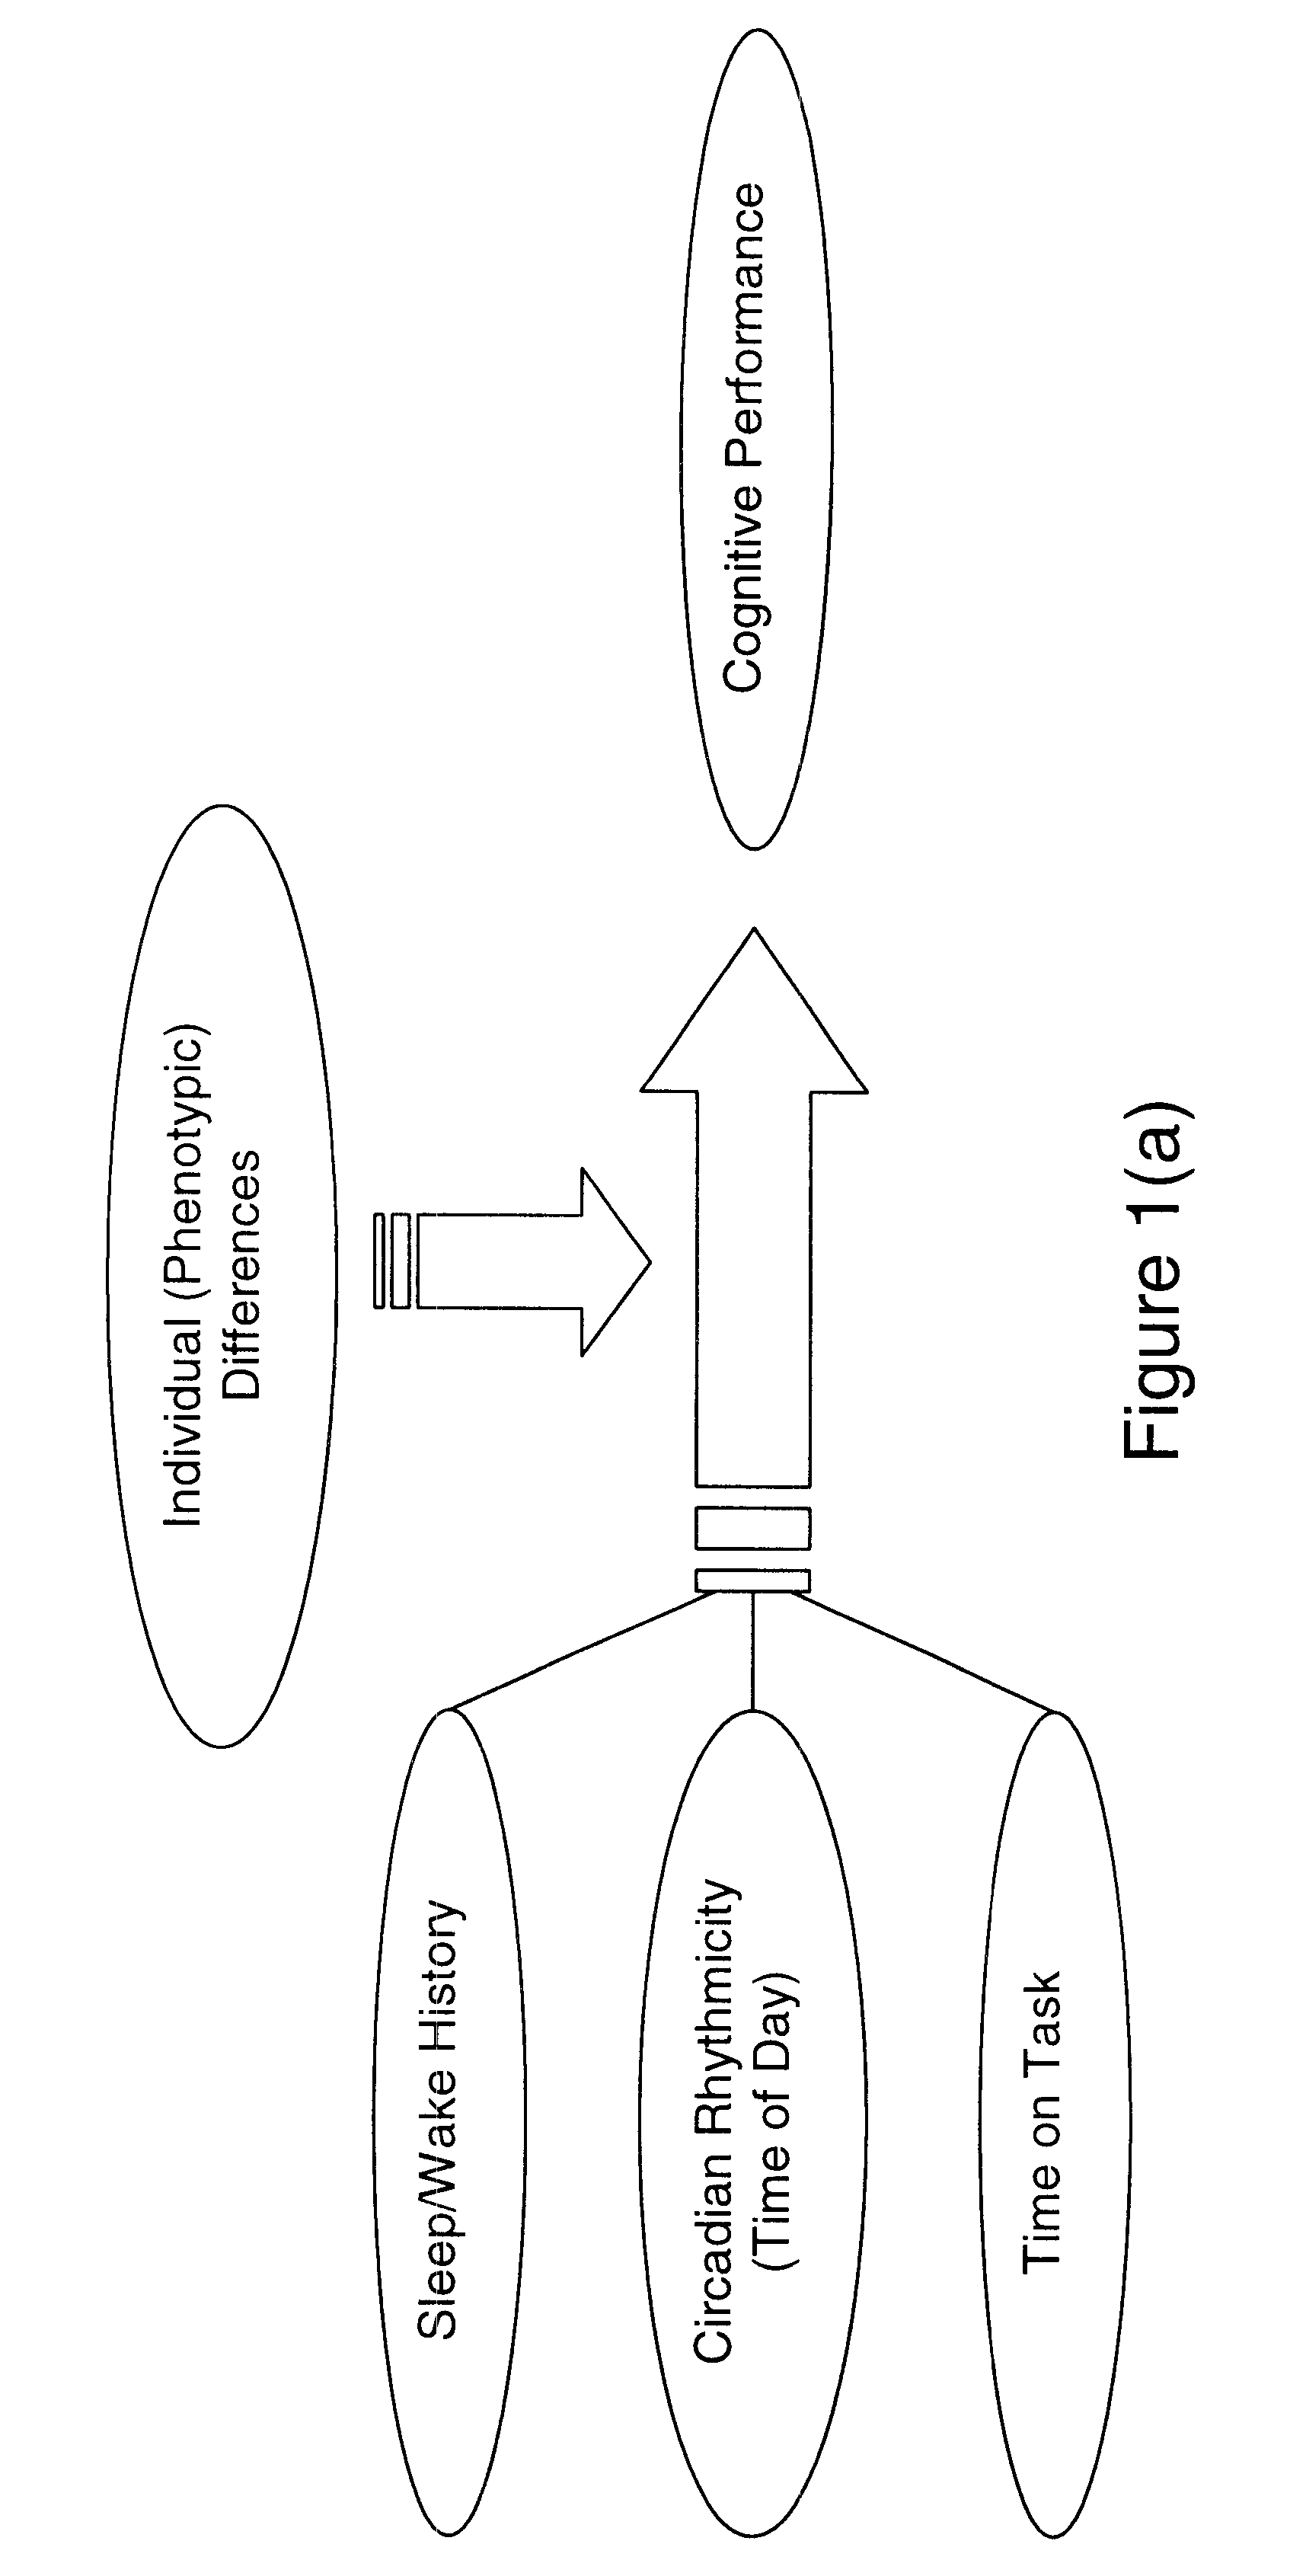 Method and system for predicting human cognitive performance